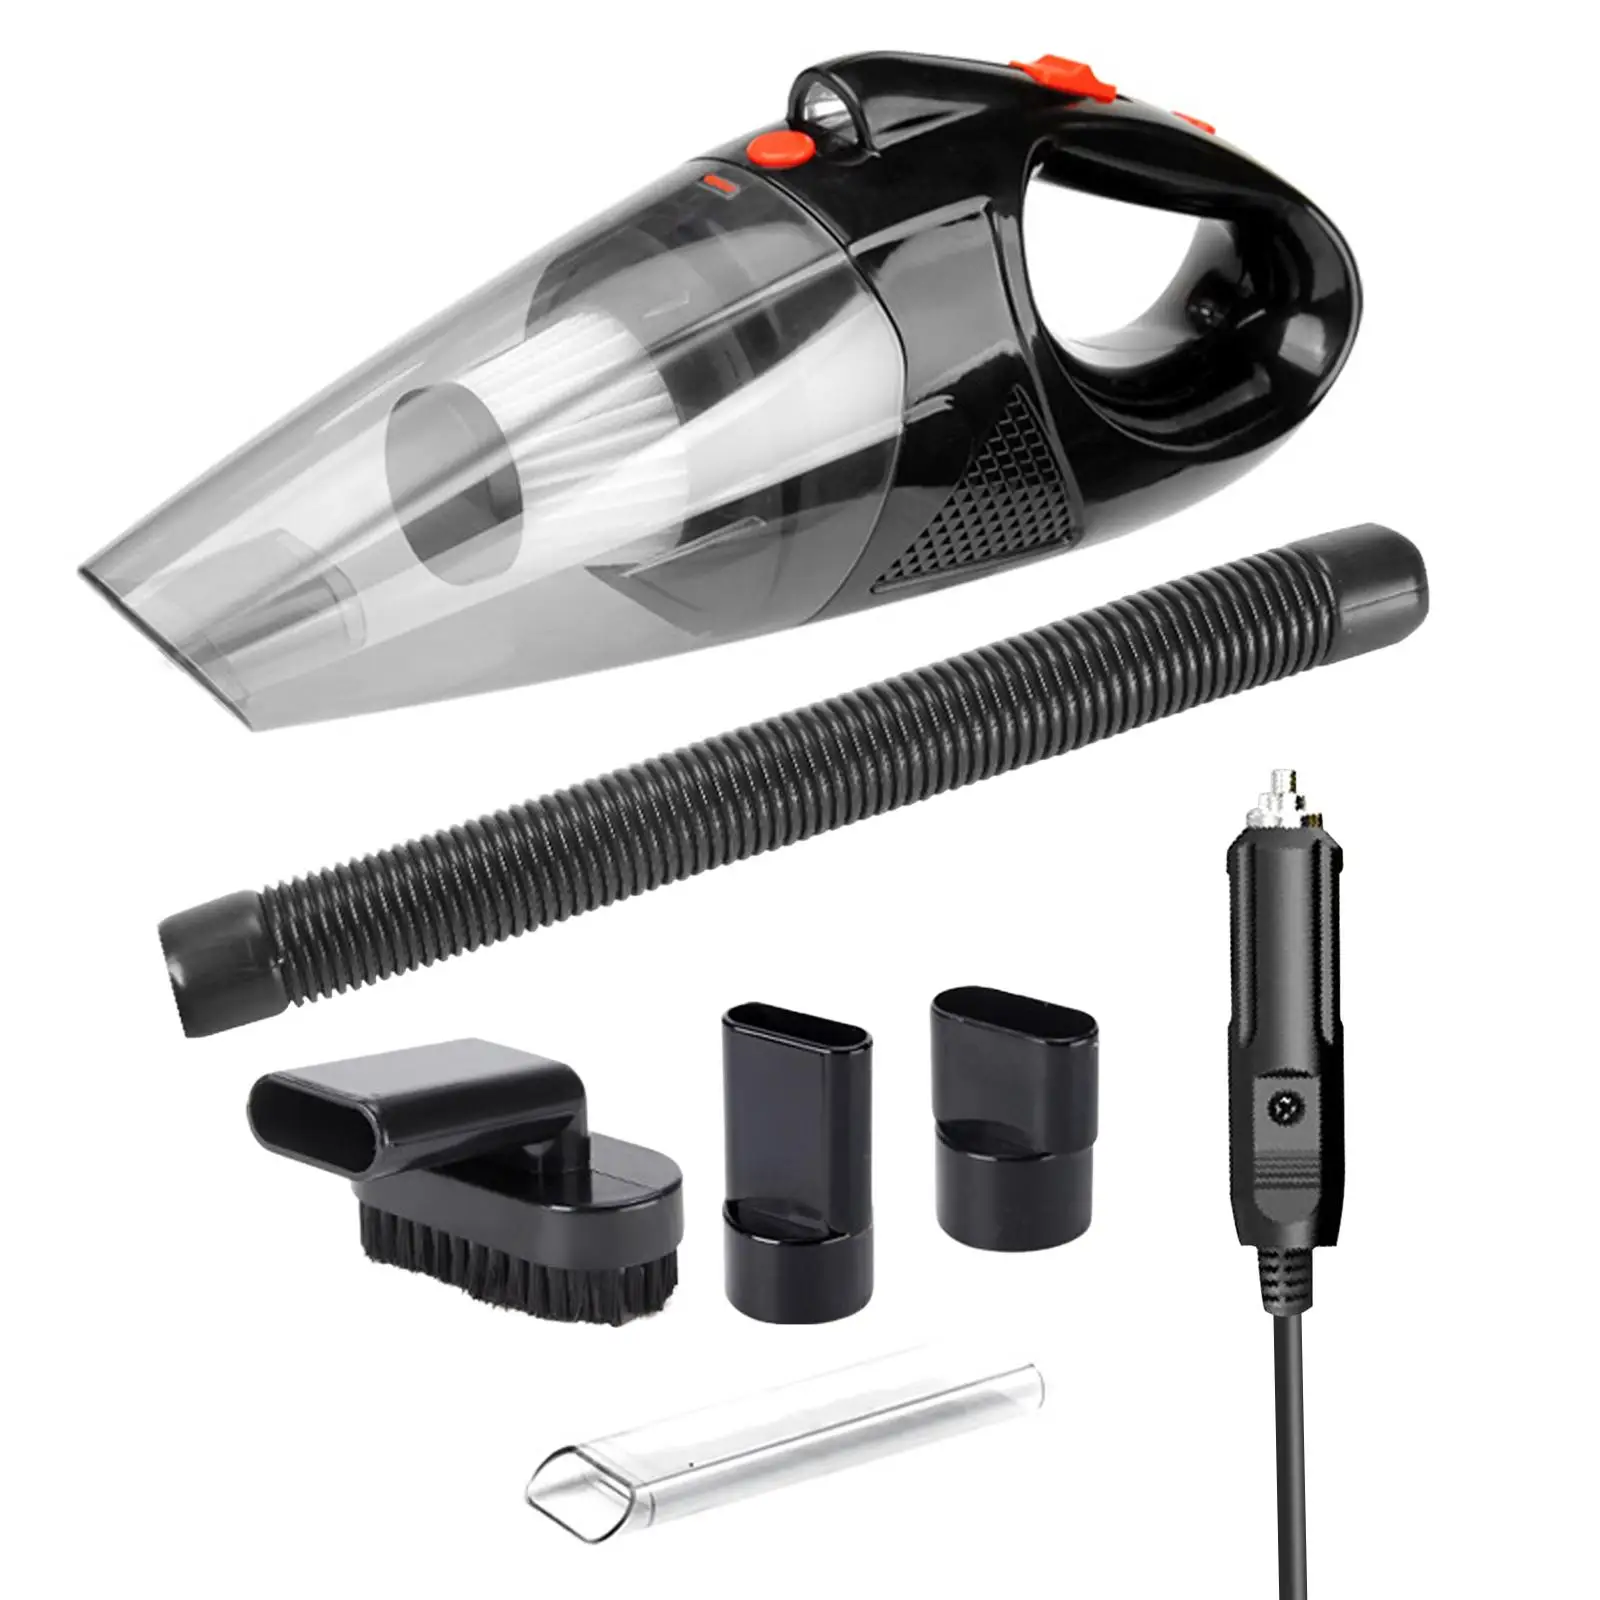 Portable Car Vacuum Cleaner Mini Auto Accessories Wet and Dry Use Strong Suction Lightweight 120W High Power with LED Lighting